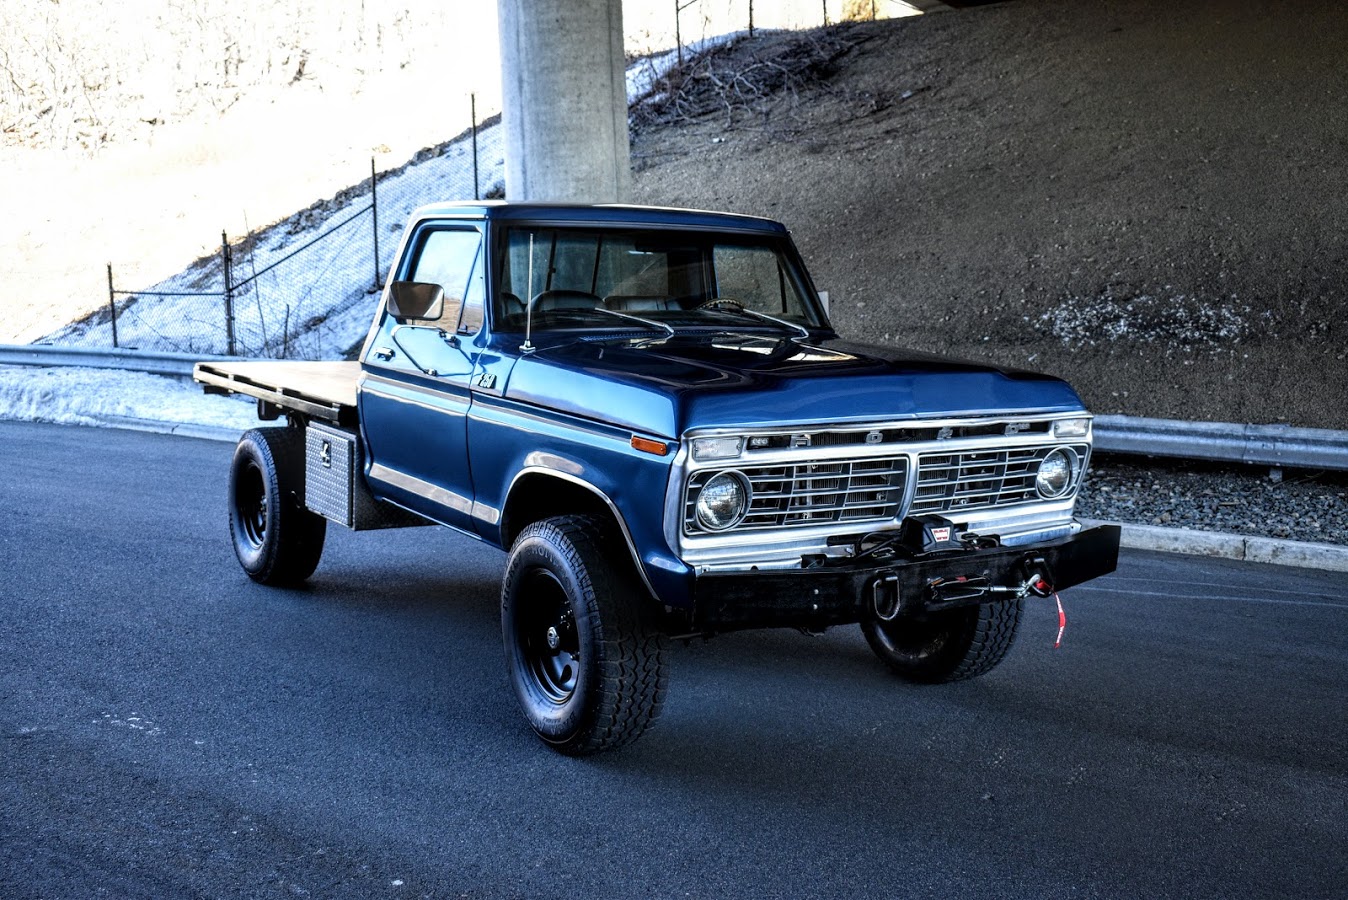 The 1973 Ford F-250 Highboy with Wood Deck Bed